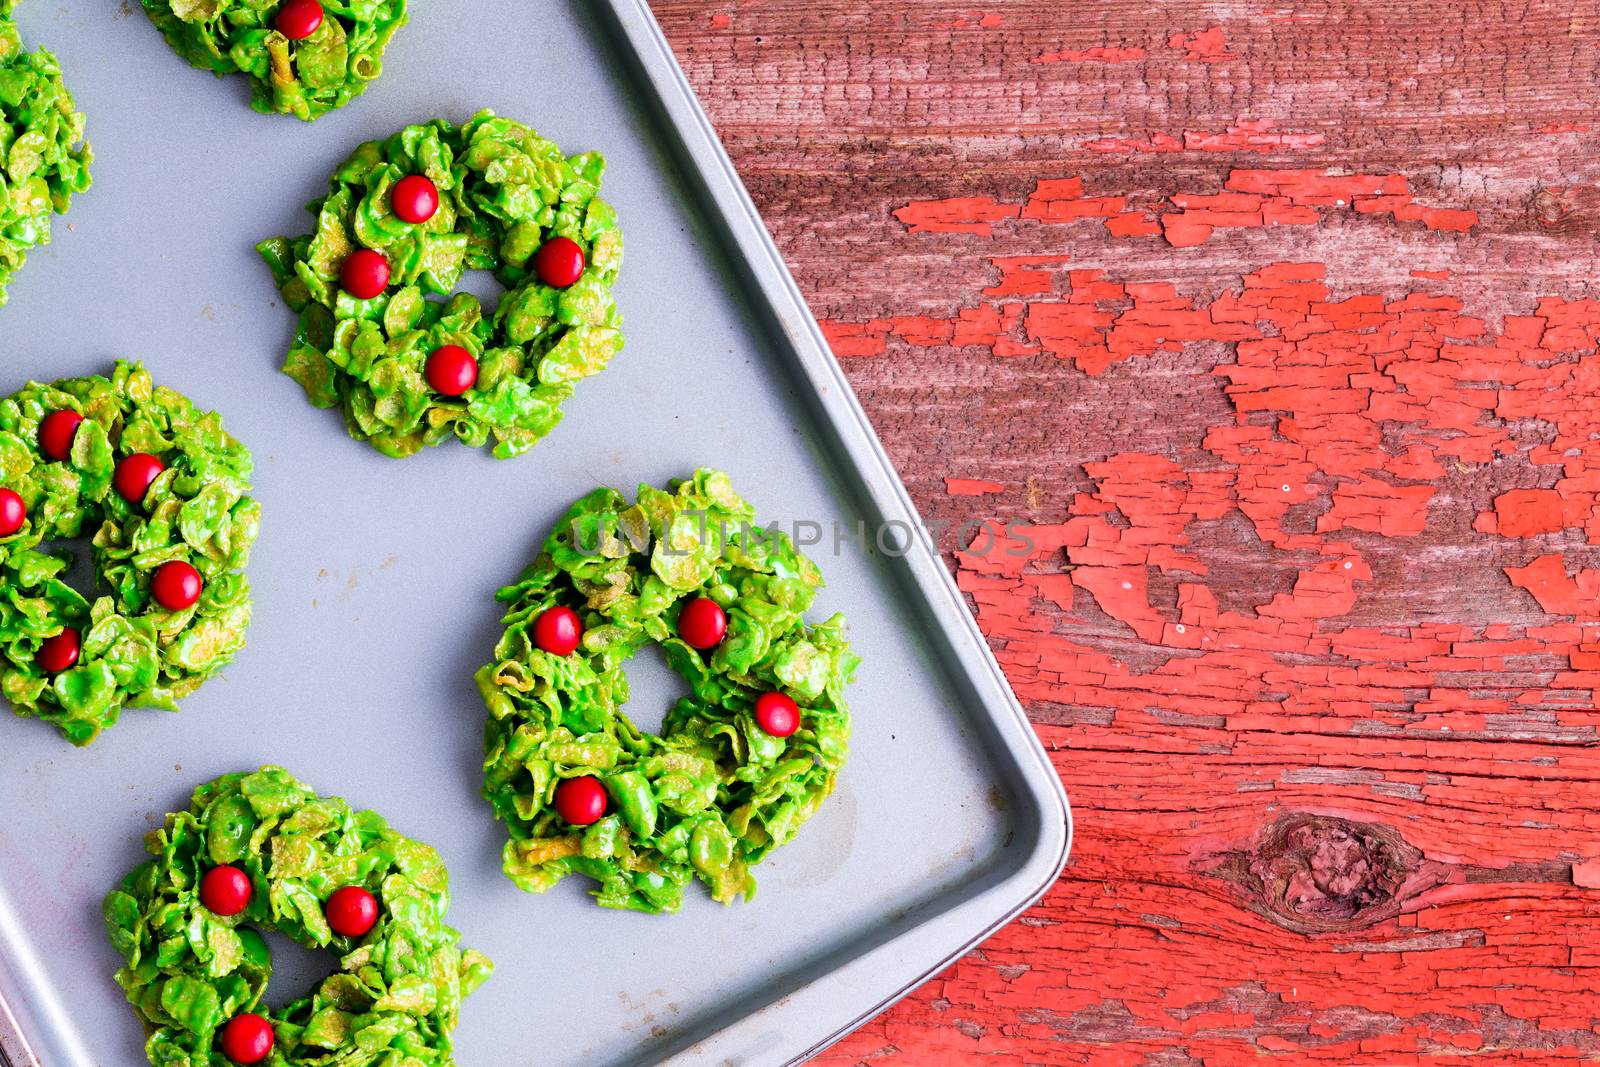 Creative colorful Xmas wreath cookies made with green cornflakes and candy pearls cooling on an oven tray on a rustic red table to celebrate the Christmas season, overhead view and copy space